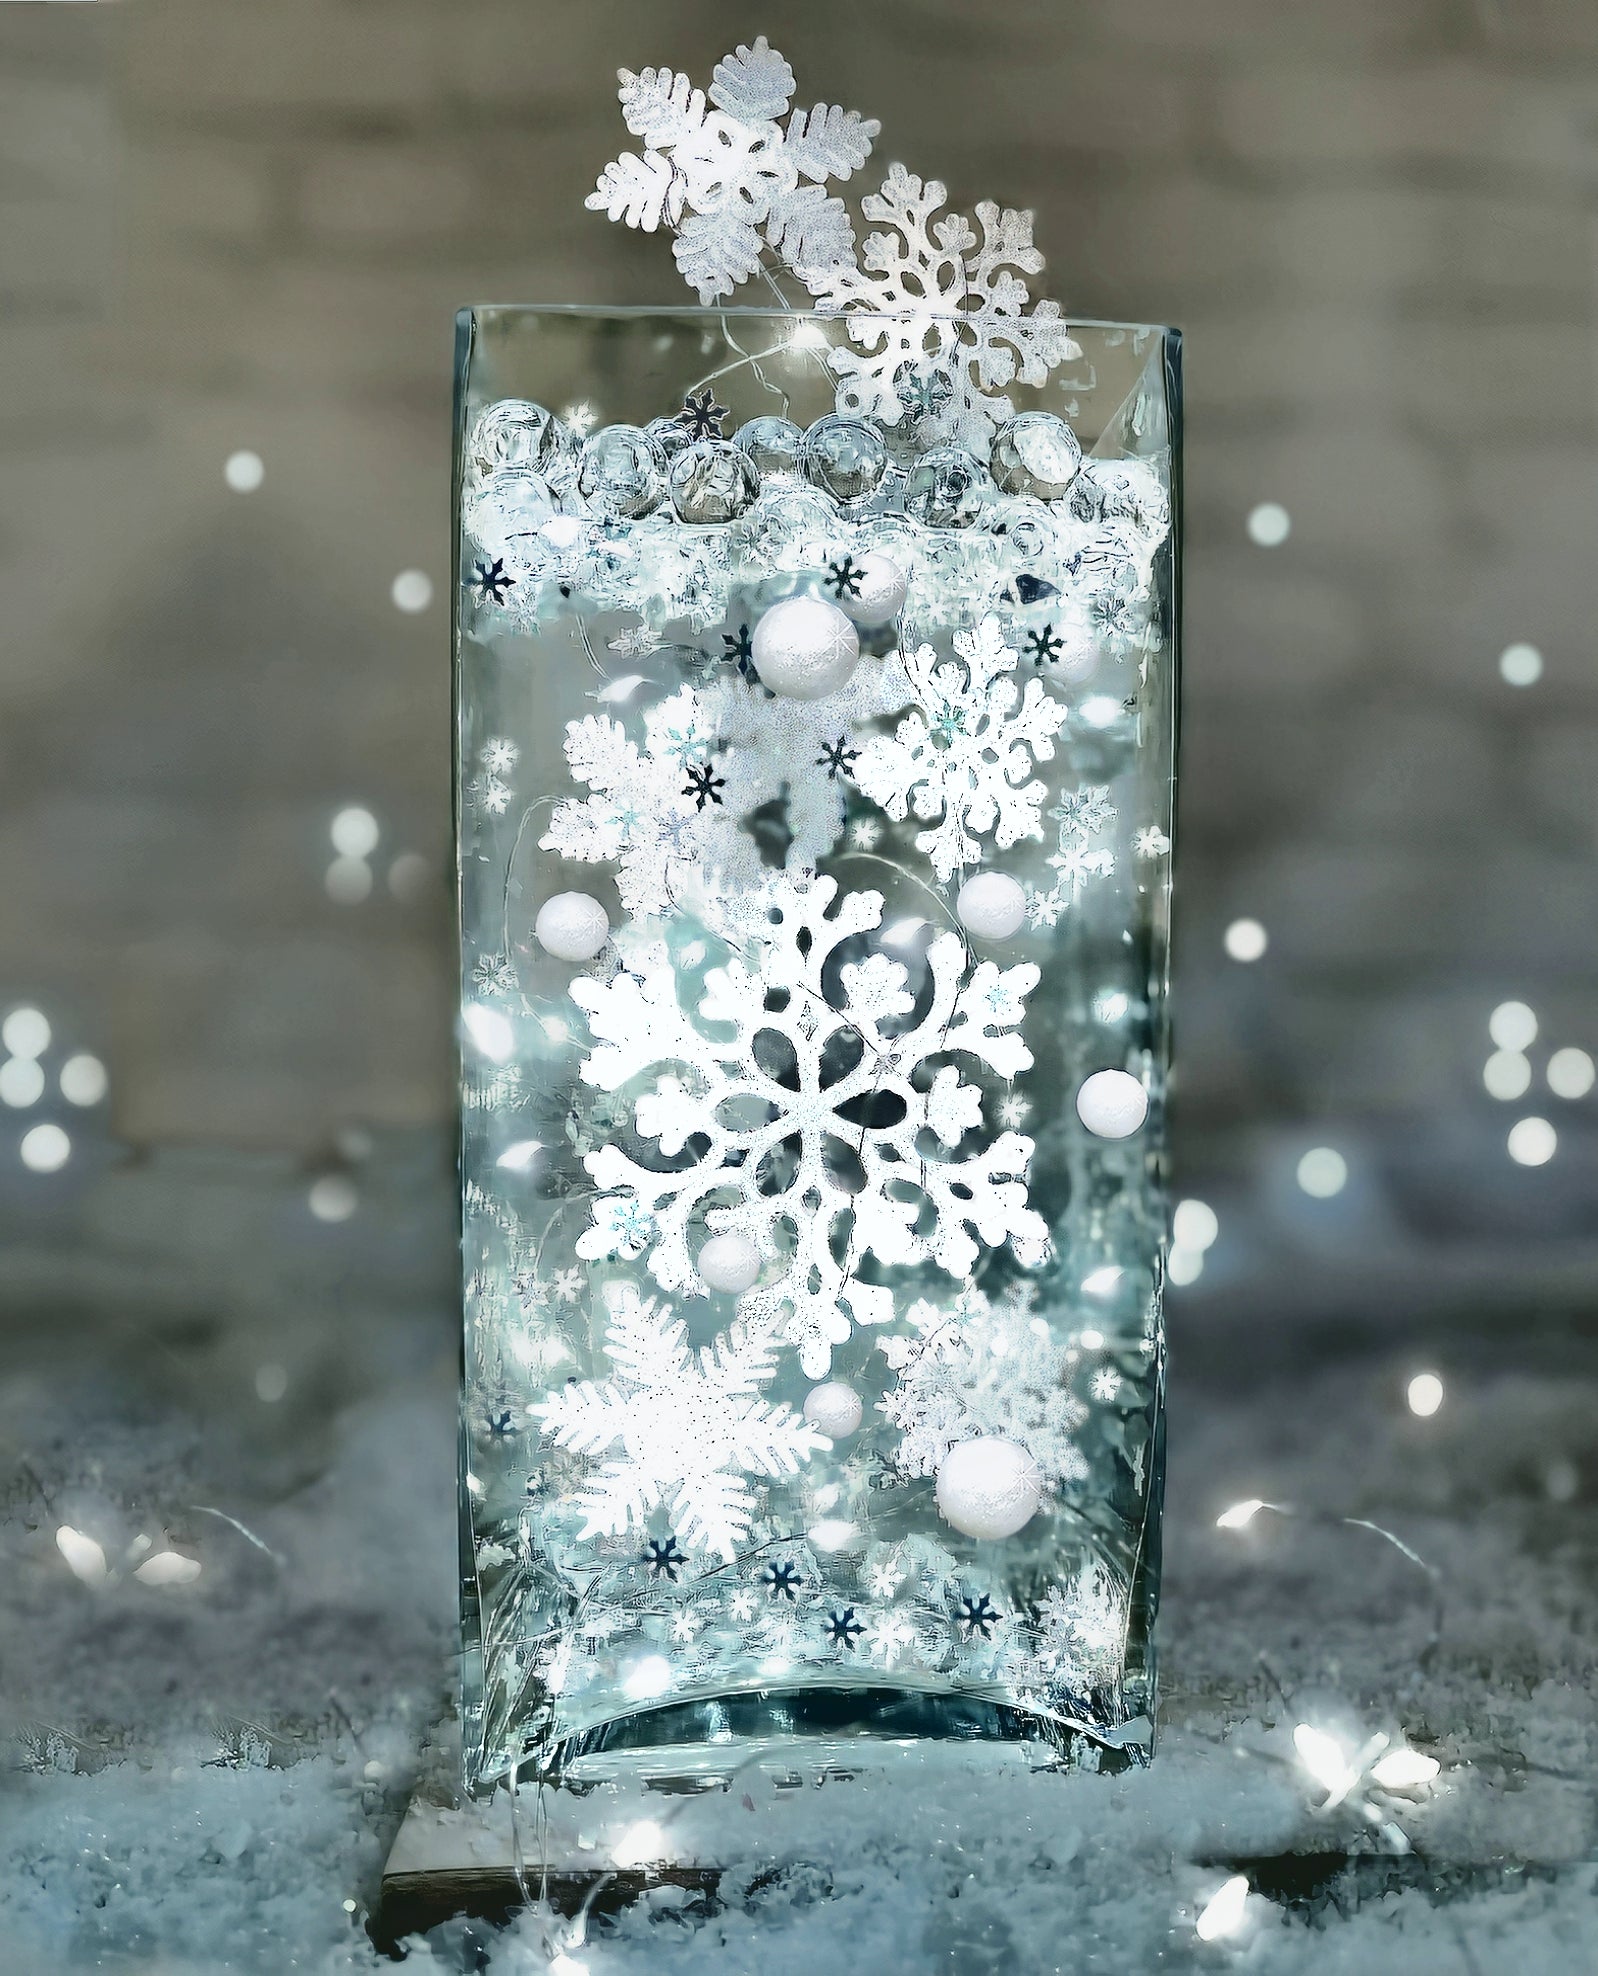  Jutom 10150 Pieces Winter Vase Filler Decor Snowflake Floating  Candles Clear Water Gel Beads Pearls for Vase Fillers Floating Candle  Centerpiece for Holiday Home Table Party Decor : Home & Kitchen